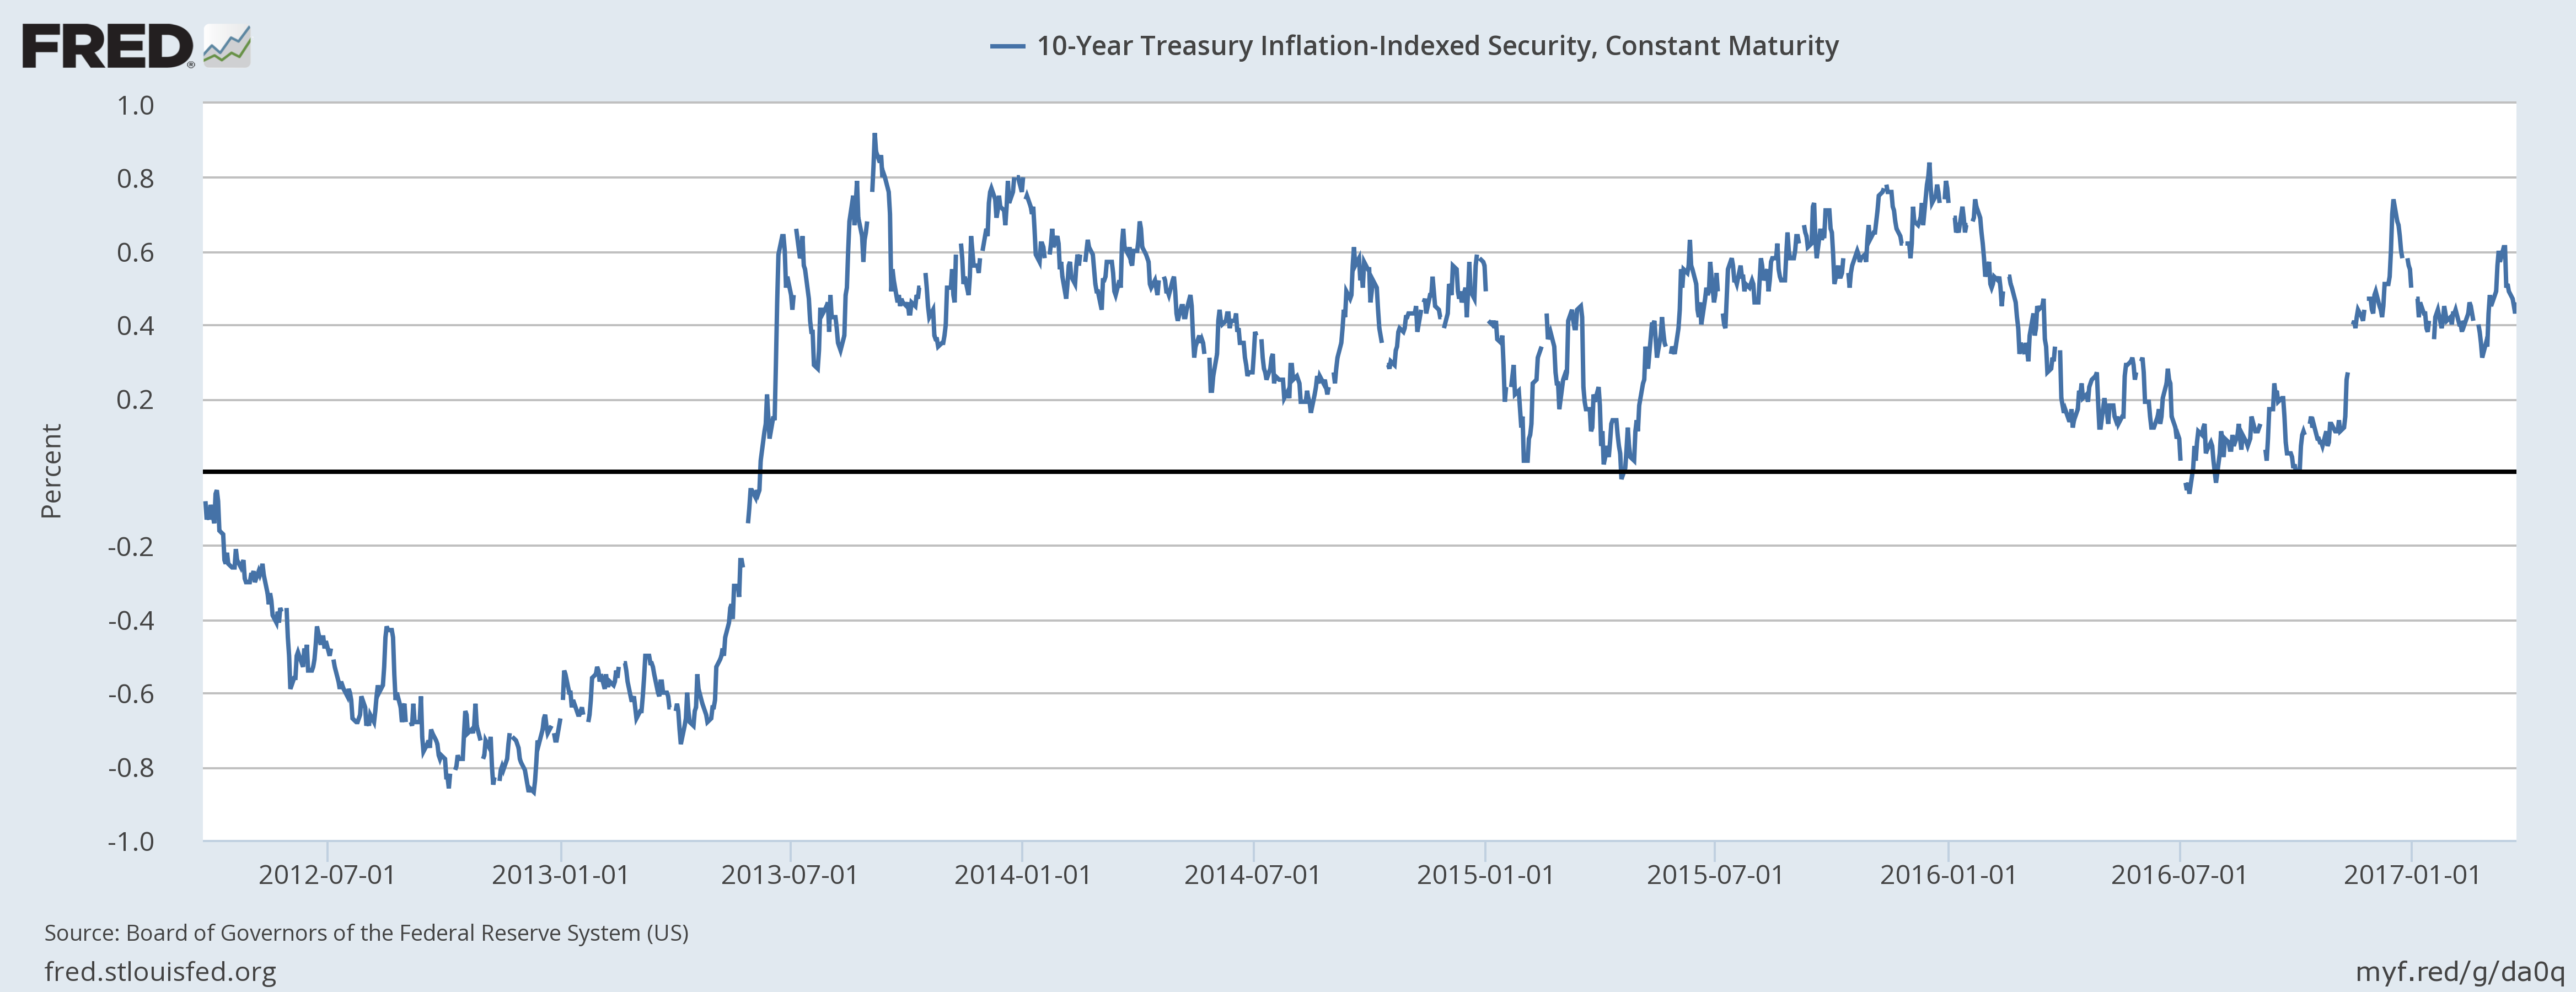 10-Year Treasury Inflation-Indexed Security, Constant Maturity